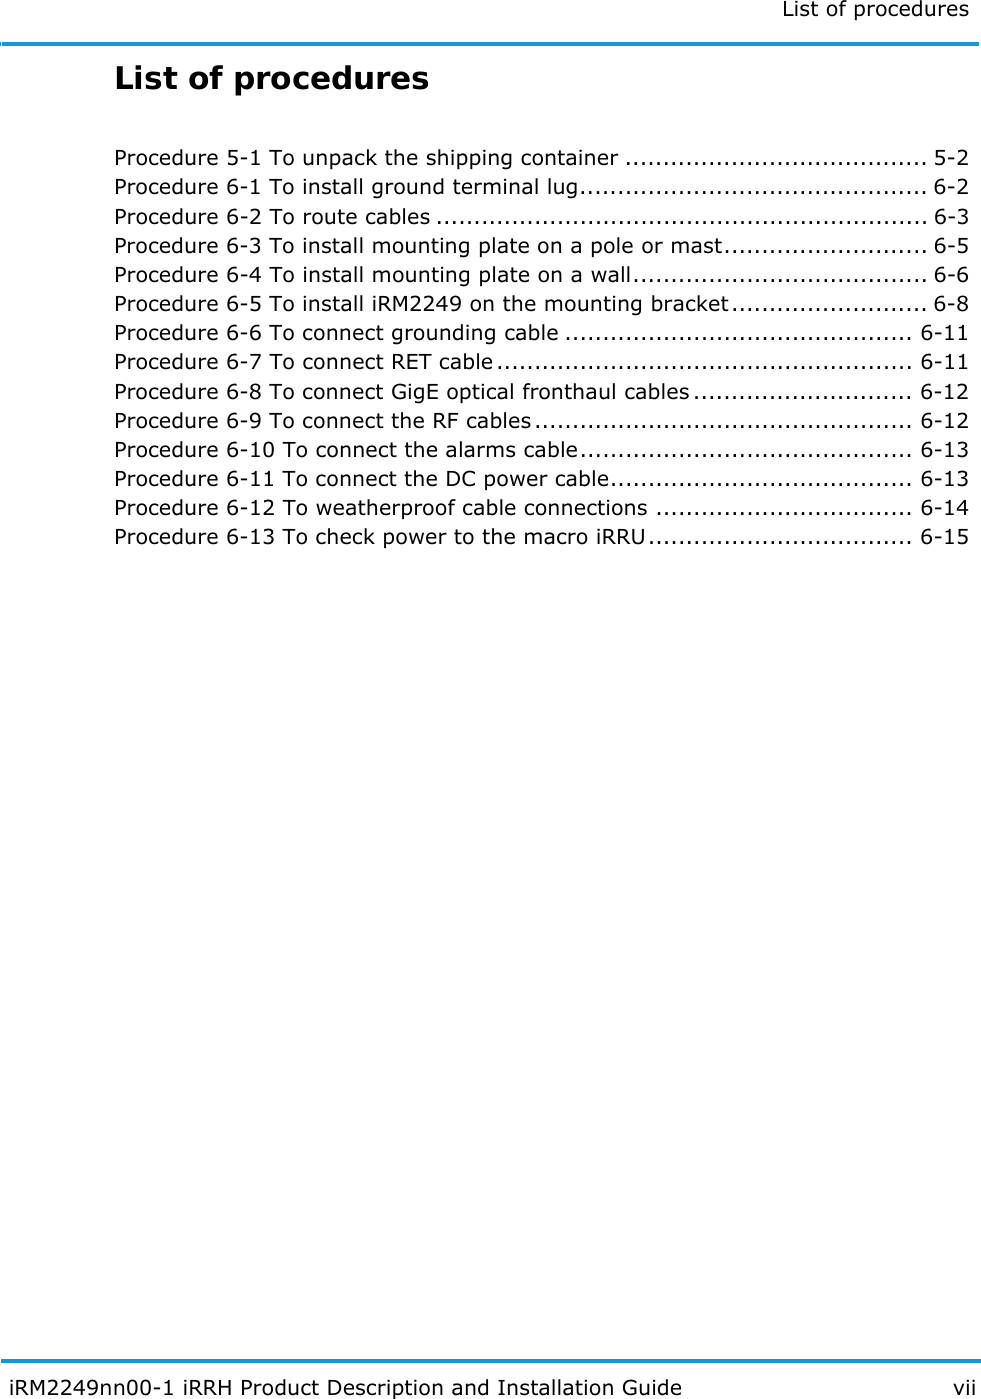 List of procedures  iRM2249nn00-1 iRRH Product Description and Installation Guide viiList of proceduresProcedure 5-1 To unpack the shipping container ........................................ 5-2Procedure 6-1 To install ground terminal lug.............................................. 6-2Procedure 6-2 To route cables ................................................................. 6-3Procedure 6-3 To install mounting plate on a pole or mast........................... 6-5Procedure 6-4 To install mounting plate on a wall....................................... 6-6Procedure 6-5 To install iRM2249 on the mounting bracket.......................... 6-8Procedure 6-6 To connect grounding cable .............................................. 6-11Procedure 6-7 To connect RET cable....................................................... 6-11Procedure 6-8 To connect GigE optical fronthaul cables ............................. 6-12Procedure 6-9 To connect the RF cables.................................................. 6-12Procedure 6-10 To connect the alarms cable............................................ 6-13Procedure 6-11 To connect the DC power cable........................................ 6-13Procedure 6-12 To weatherproof cable connections .................................. 6-14Procedure 6-13 To check power to the macro iRRU................................... 6-15